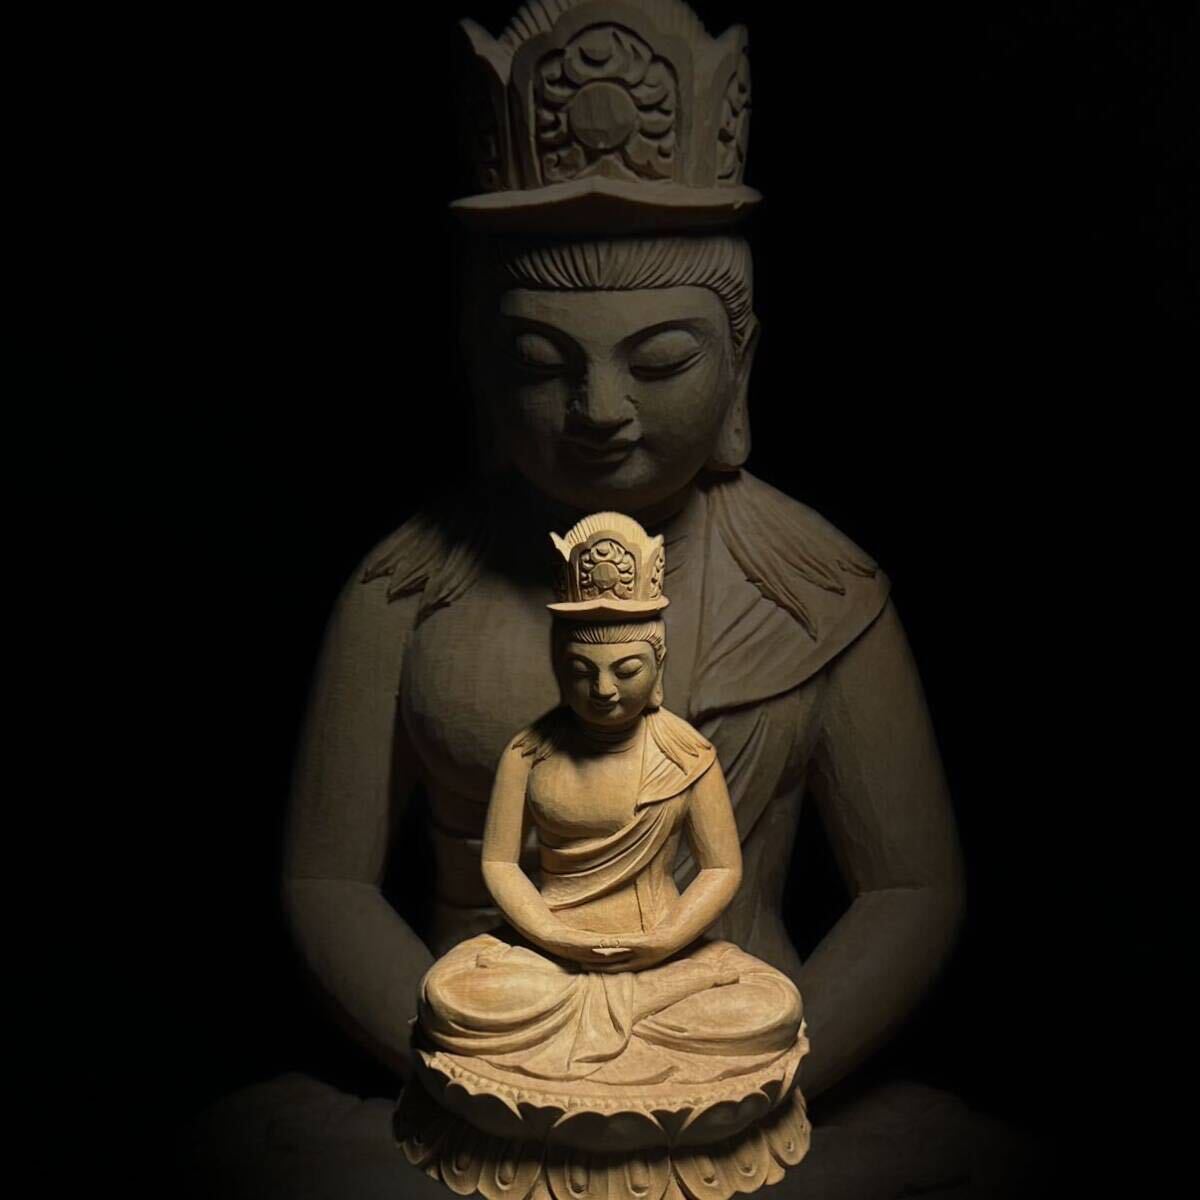  large day .. seat image tree carving Buddhist image skill sculpture ..... Buddhism fine art height 11cm weight 129g